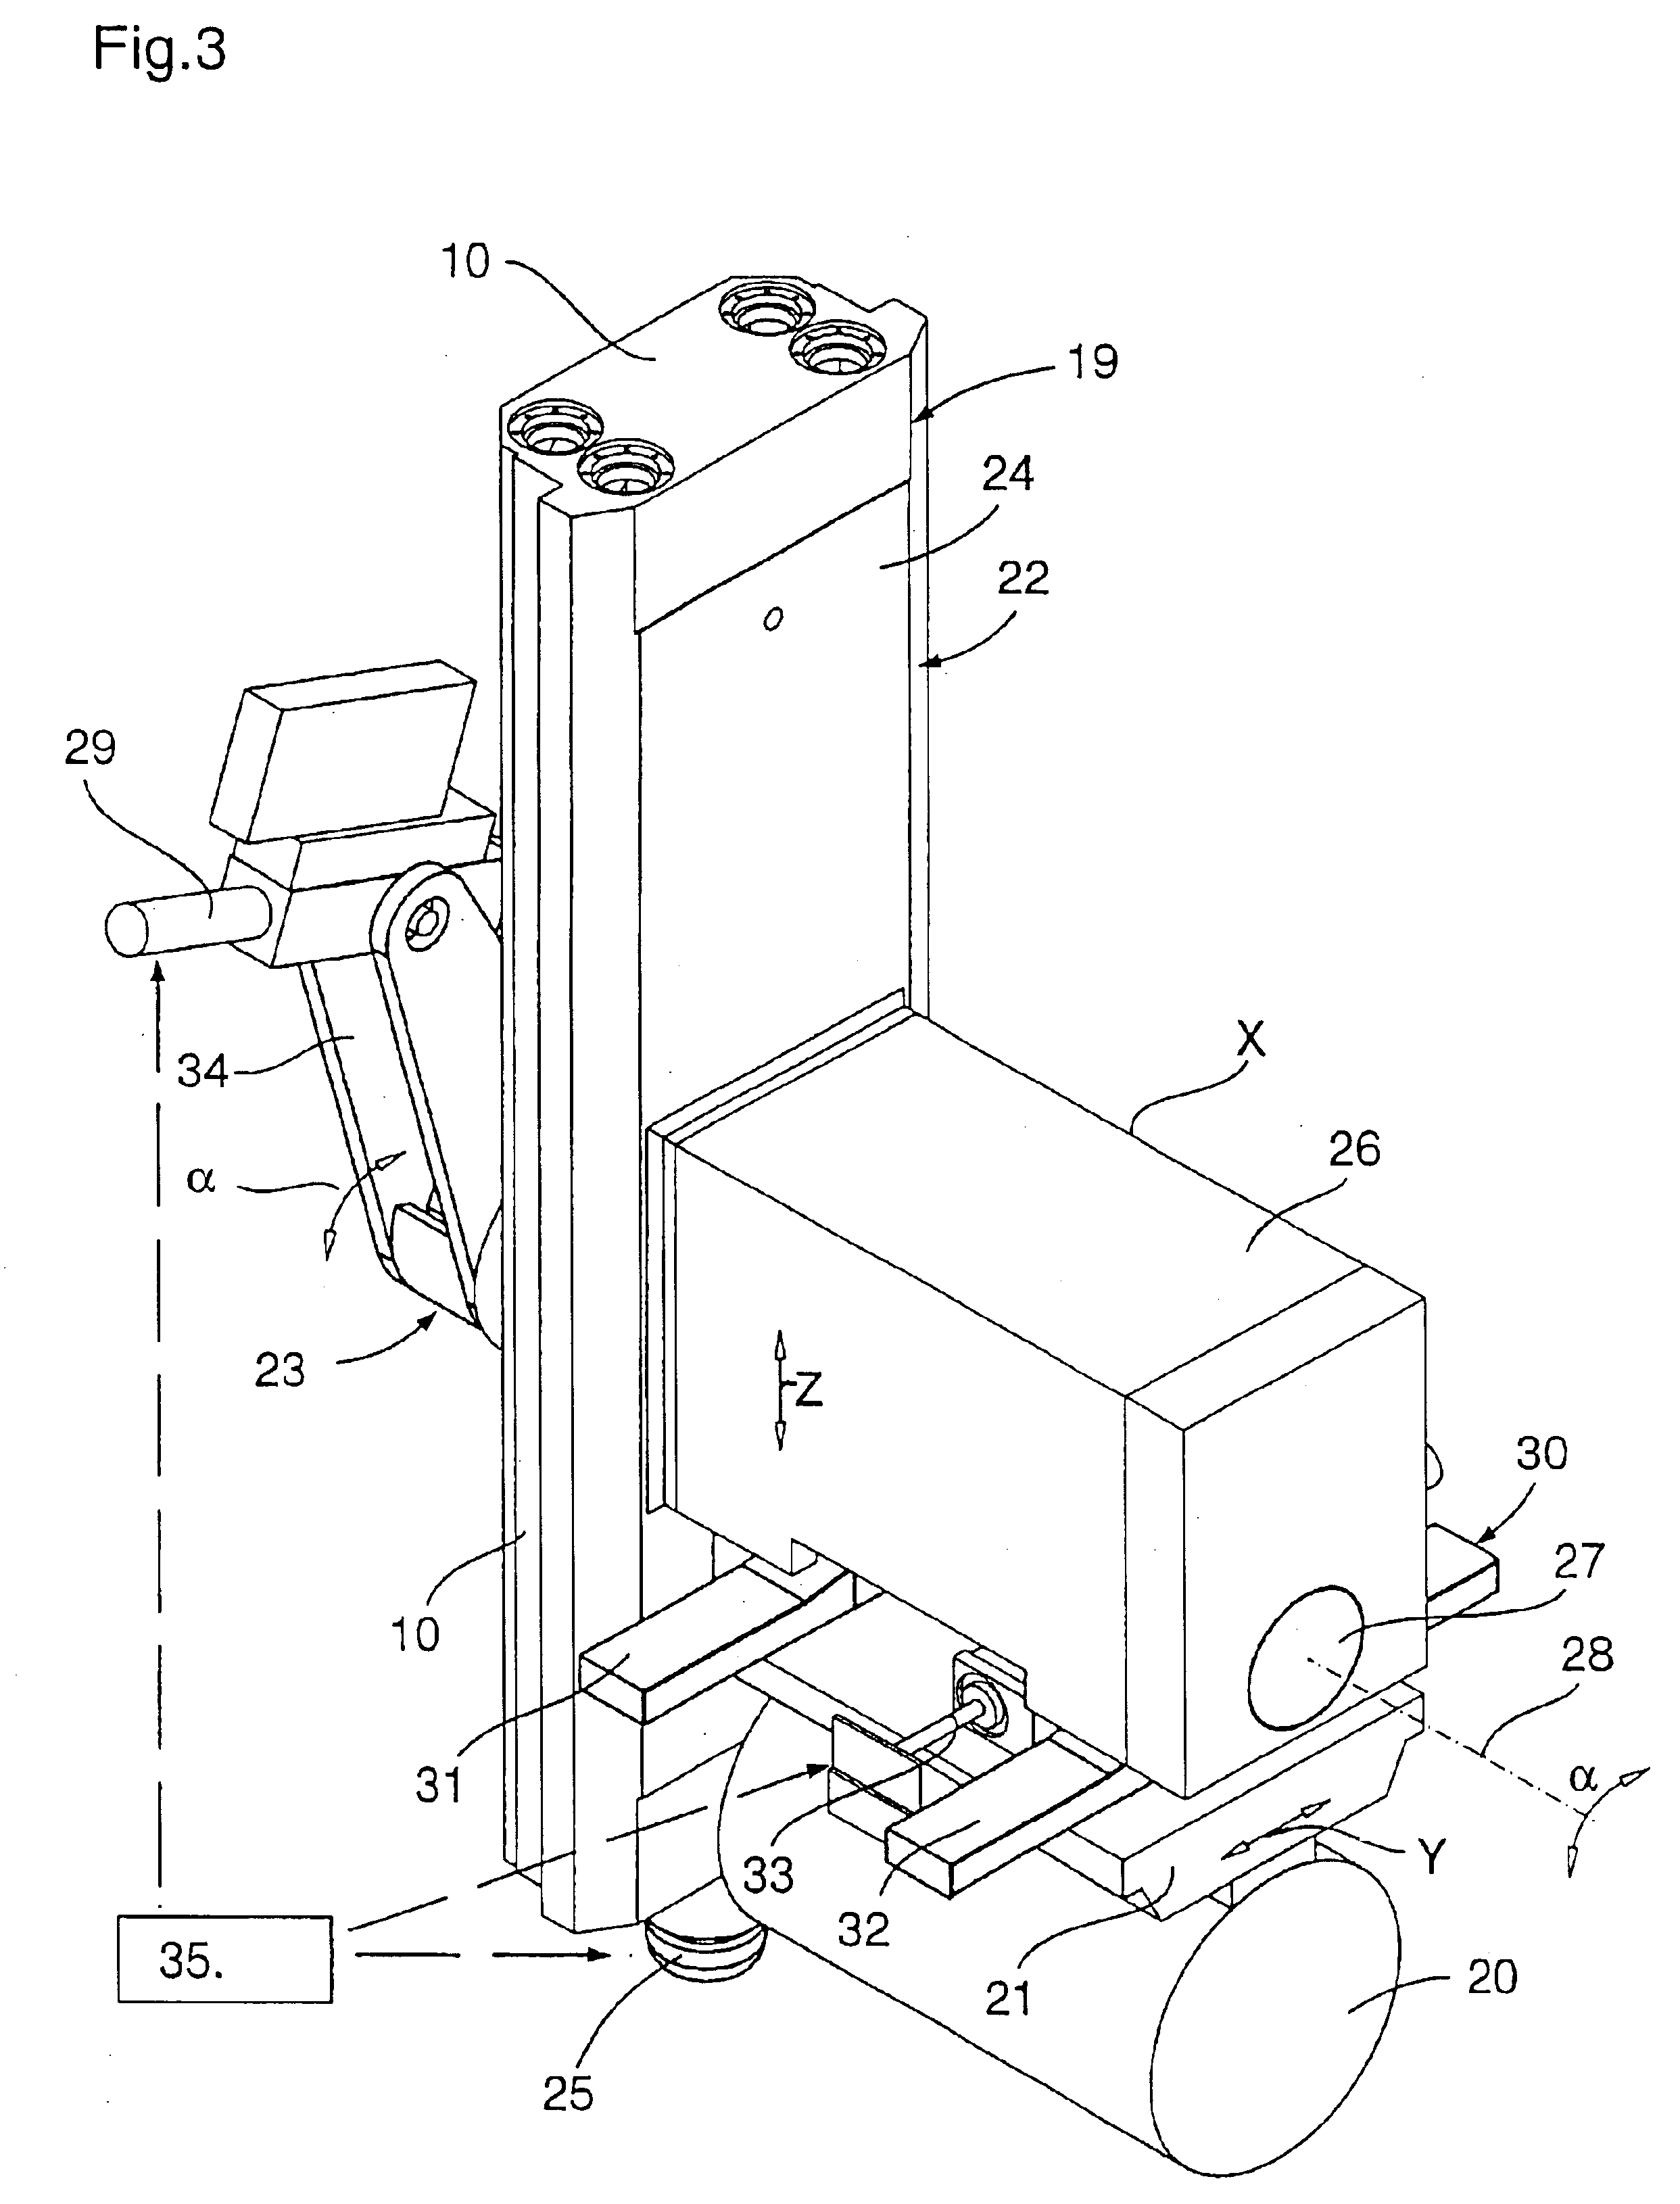 Wire saw with means for producing a relative reciprocating motion between the workpiece to be sawn and the wire